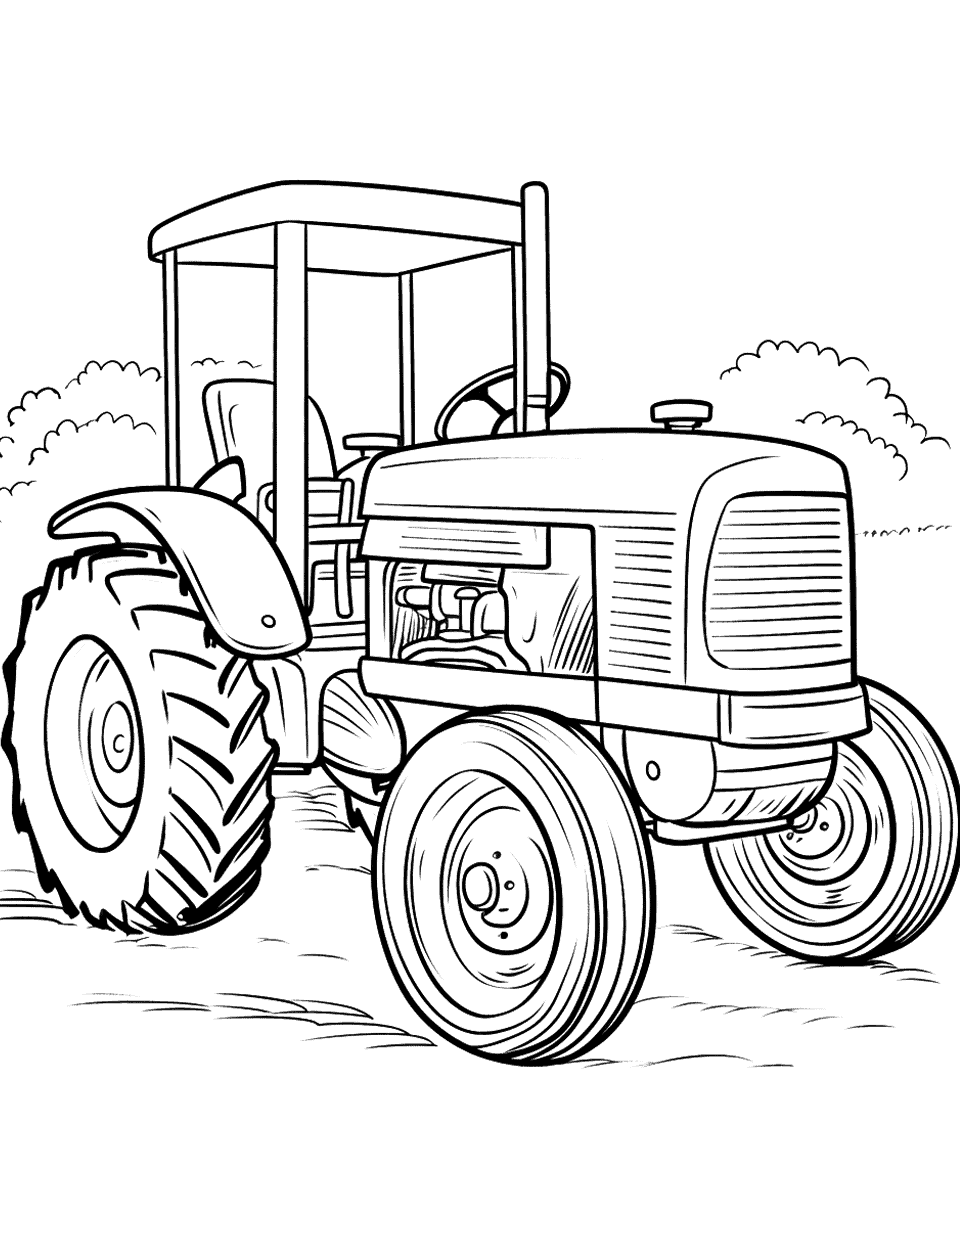 Classic Farm Tractor Coloring Page - An old-fashioned farm tractor, reminiscent of those seen in the early 20th century.